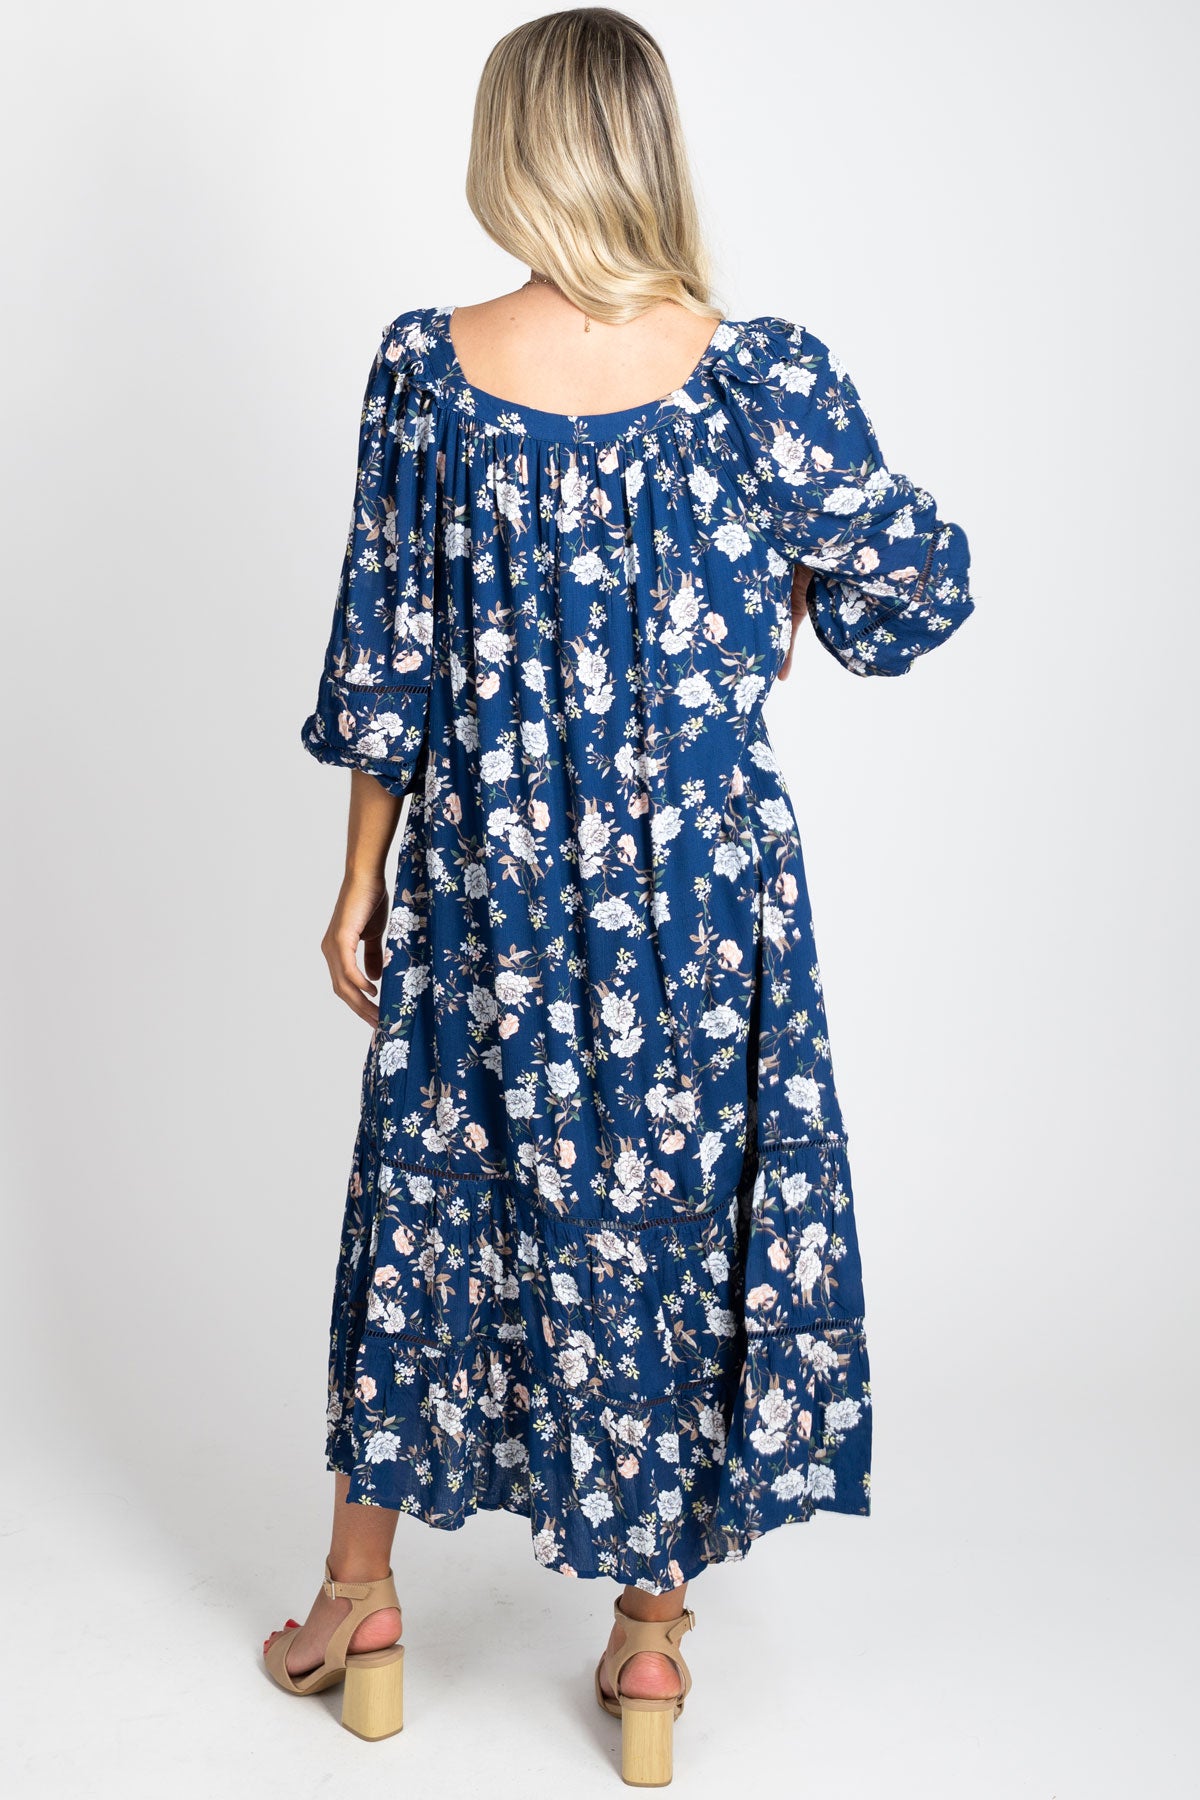 women's special occasion floral long length blue maxi dress